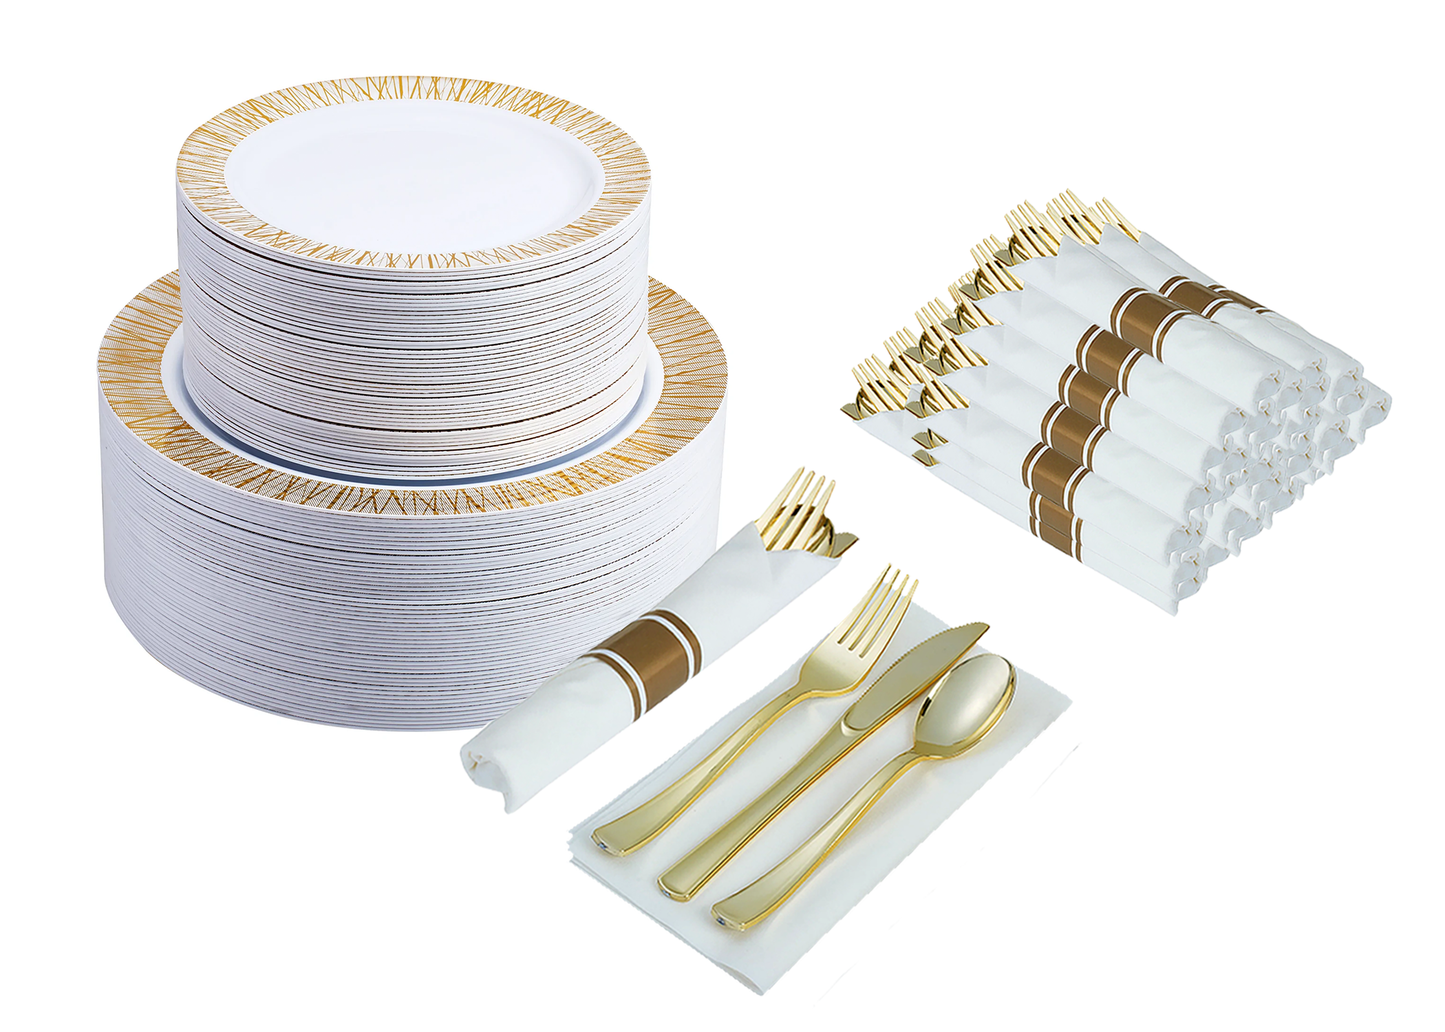 300-piece Gold Dinnerware Set for 50 guests Includes: 100 gold design plastic plates & 50 pre-wrapped gold silverware sets